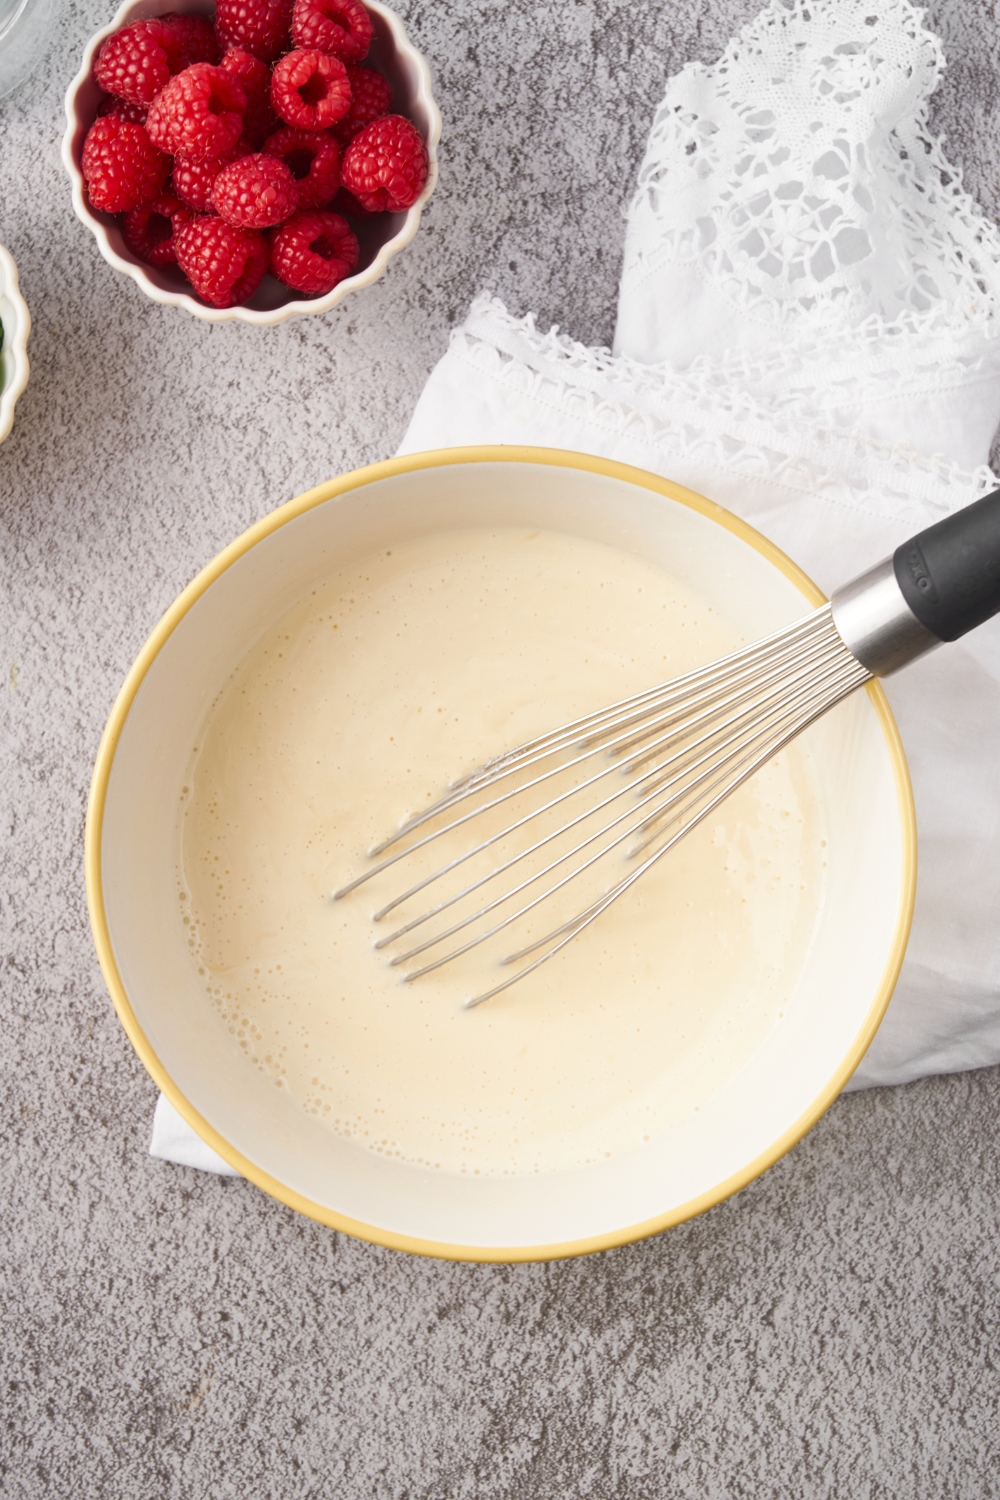 A white mixing bowl with custard and a whisk in it. A bowl of raspberries is next to the custard.